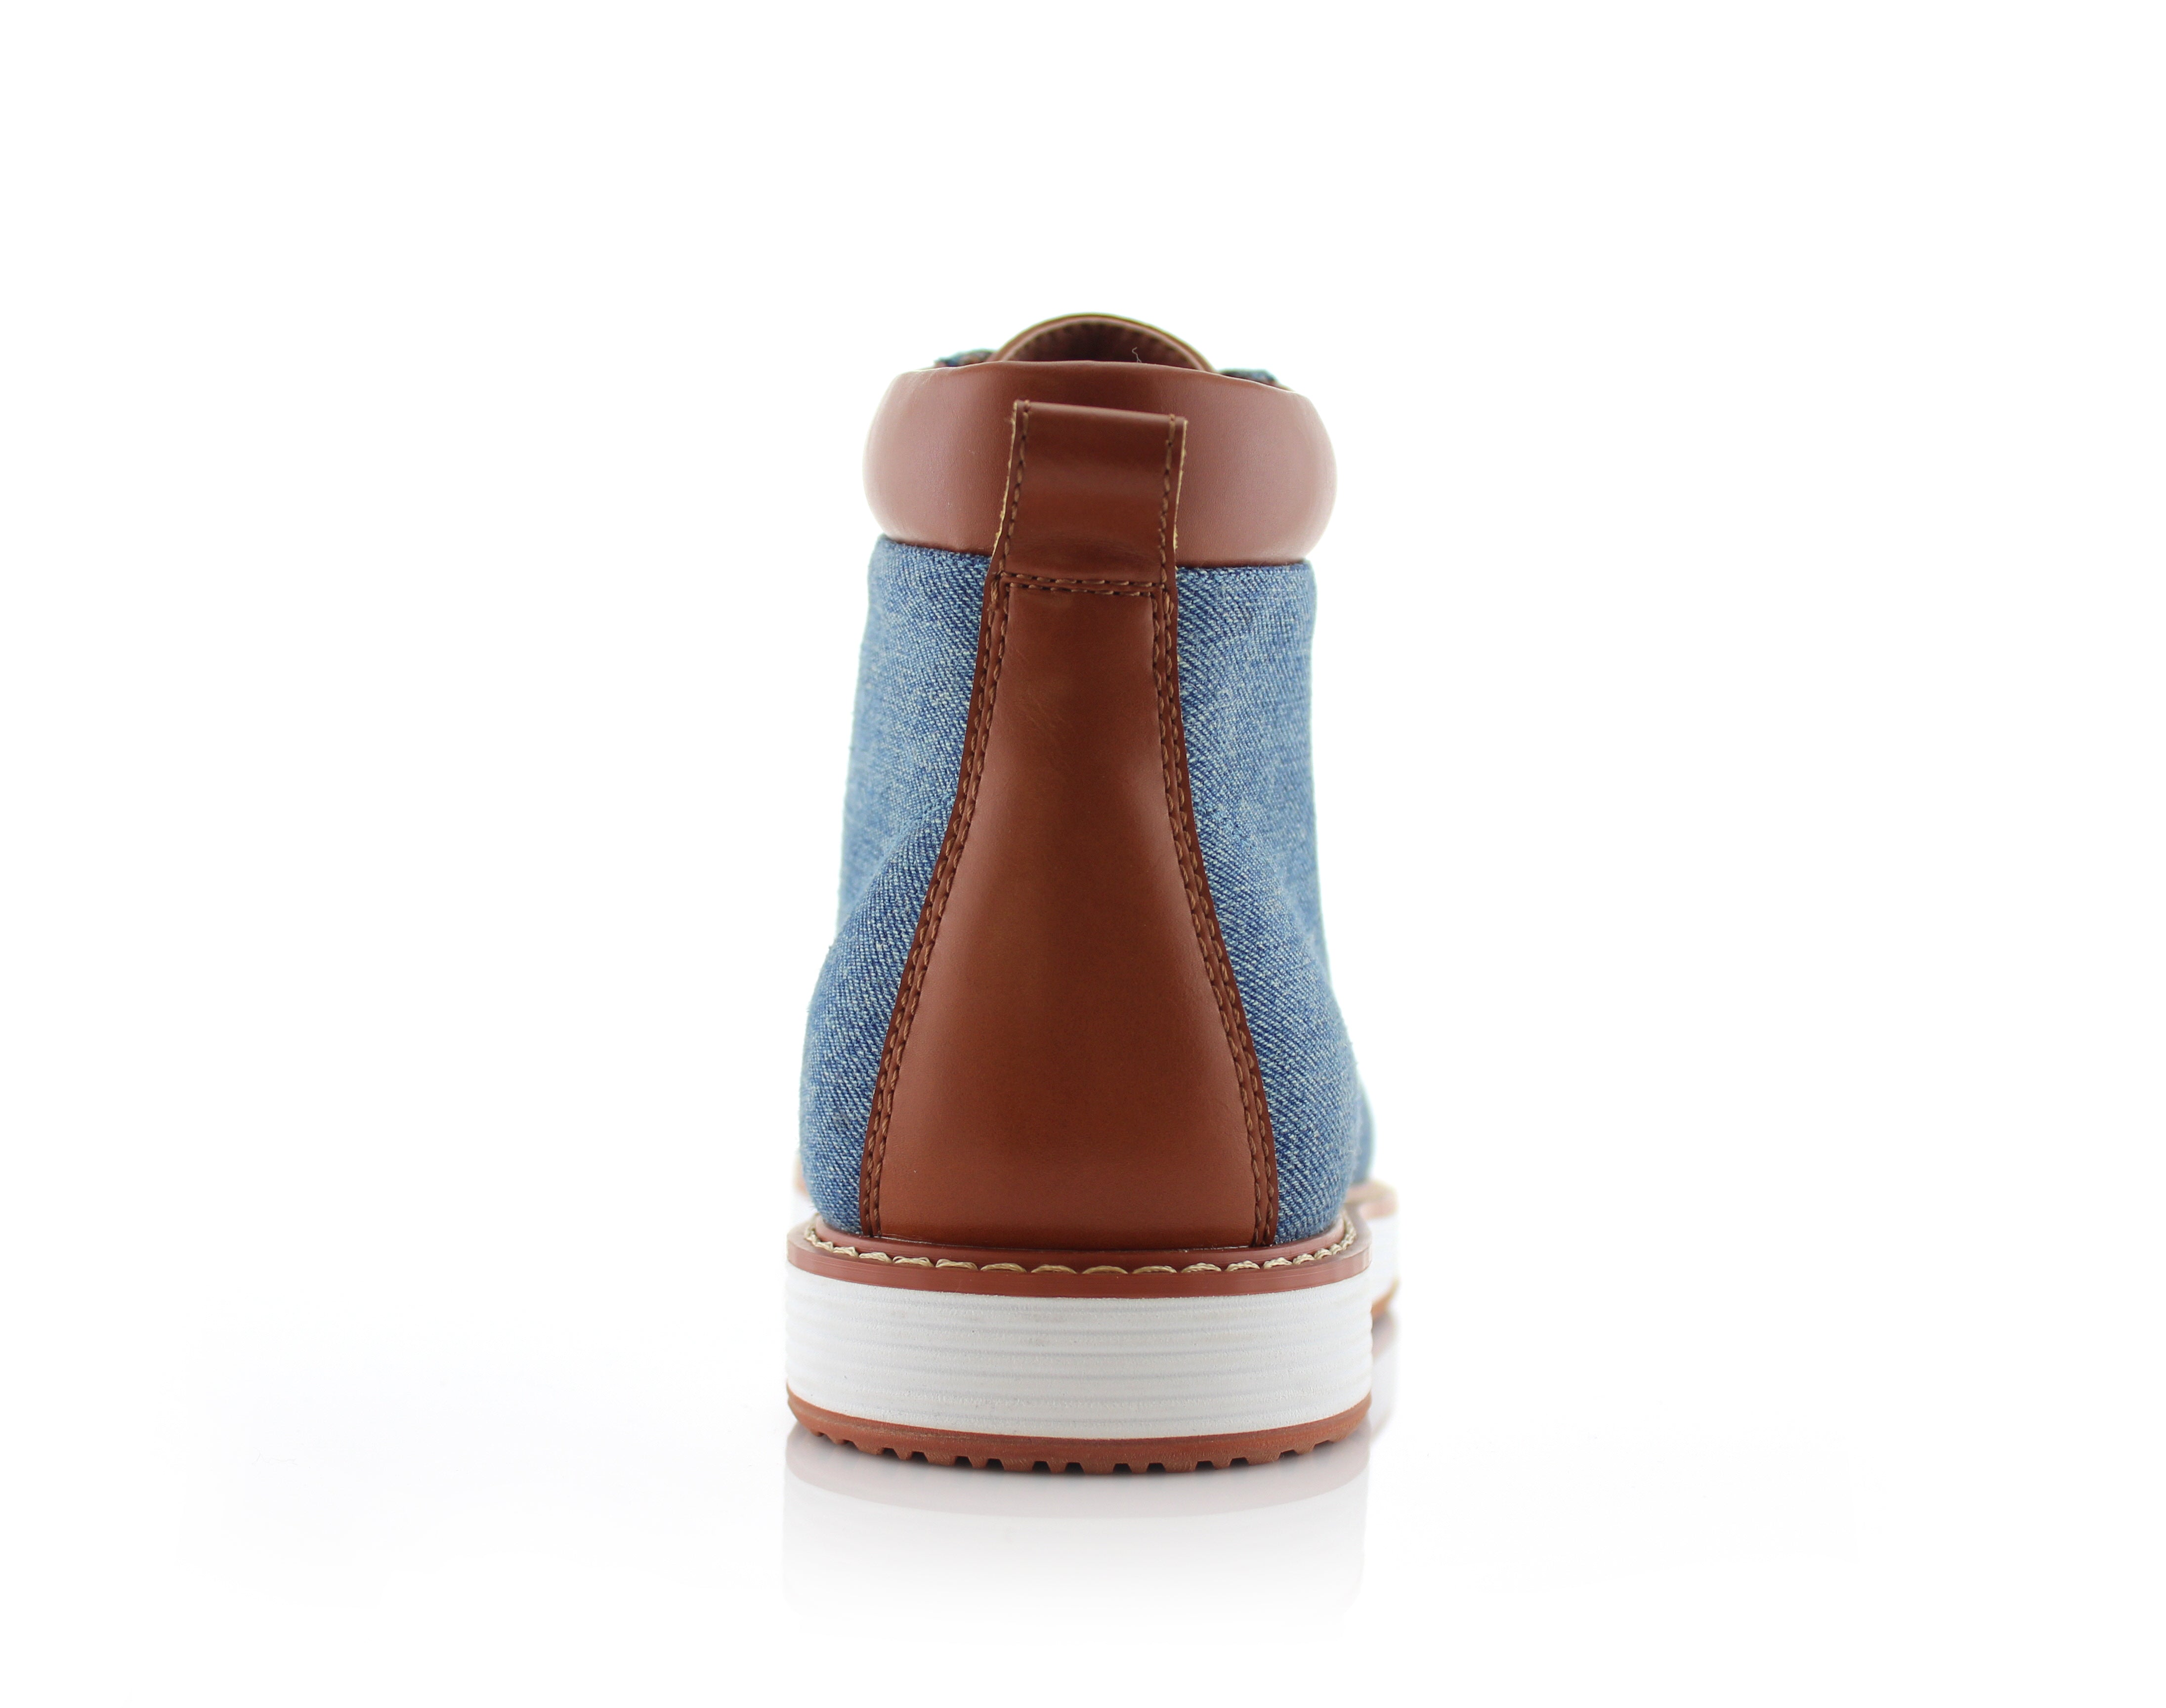 Two-Toned Sneaker Boots | Melvin by Ferro Aldo | Conal Footwear | Back Angle View